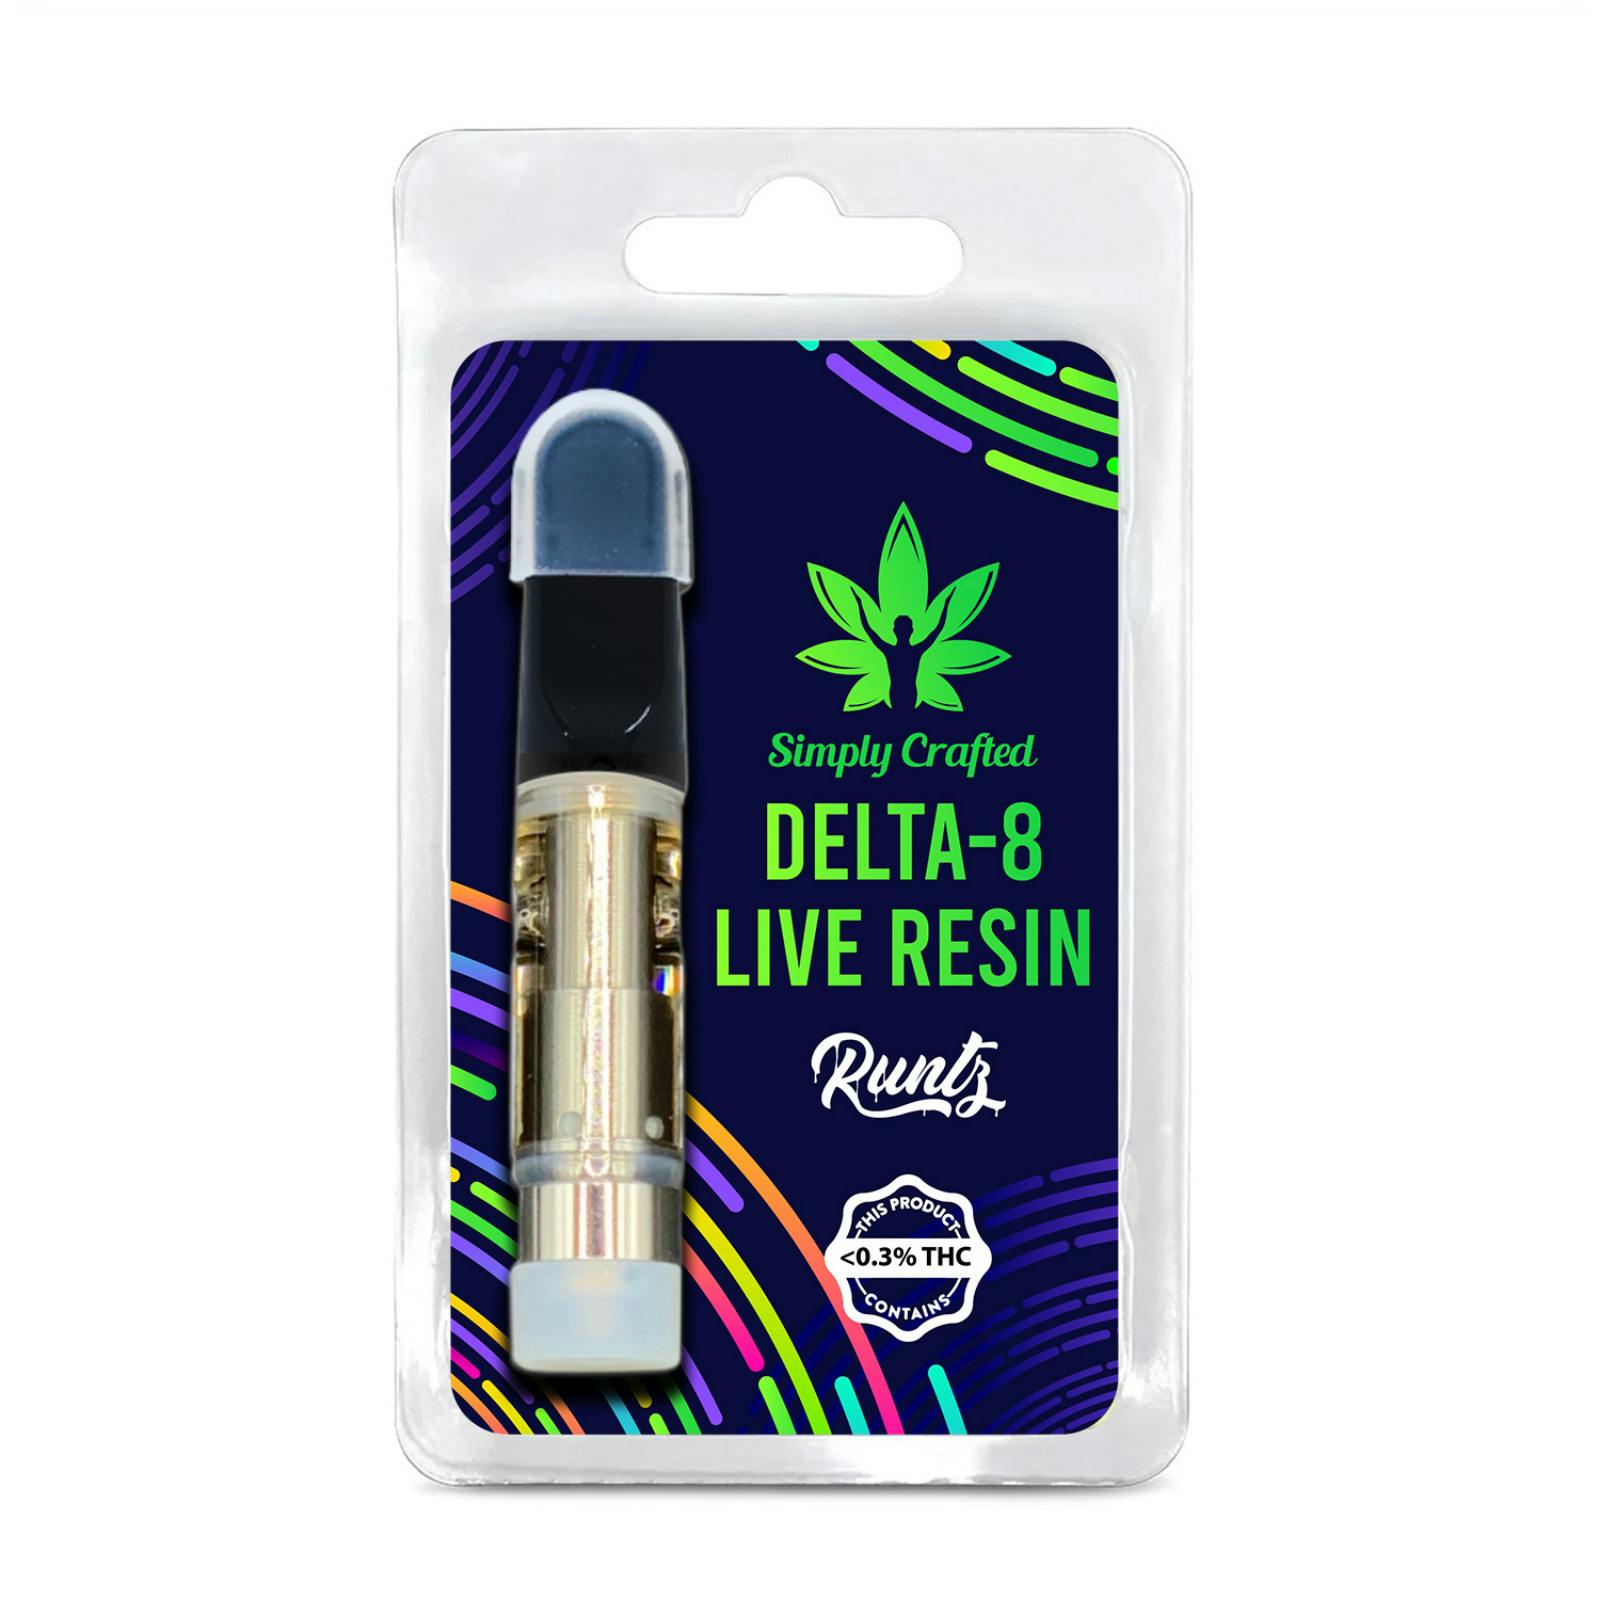 Simply Crafted Free Shipping Save 25 With Promo Code Leafly Runtz Live Resin Delta 8 Thc 6418